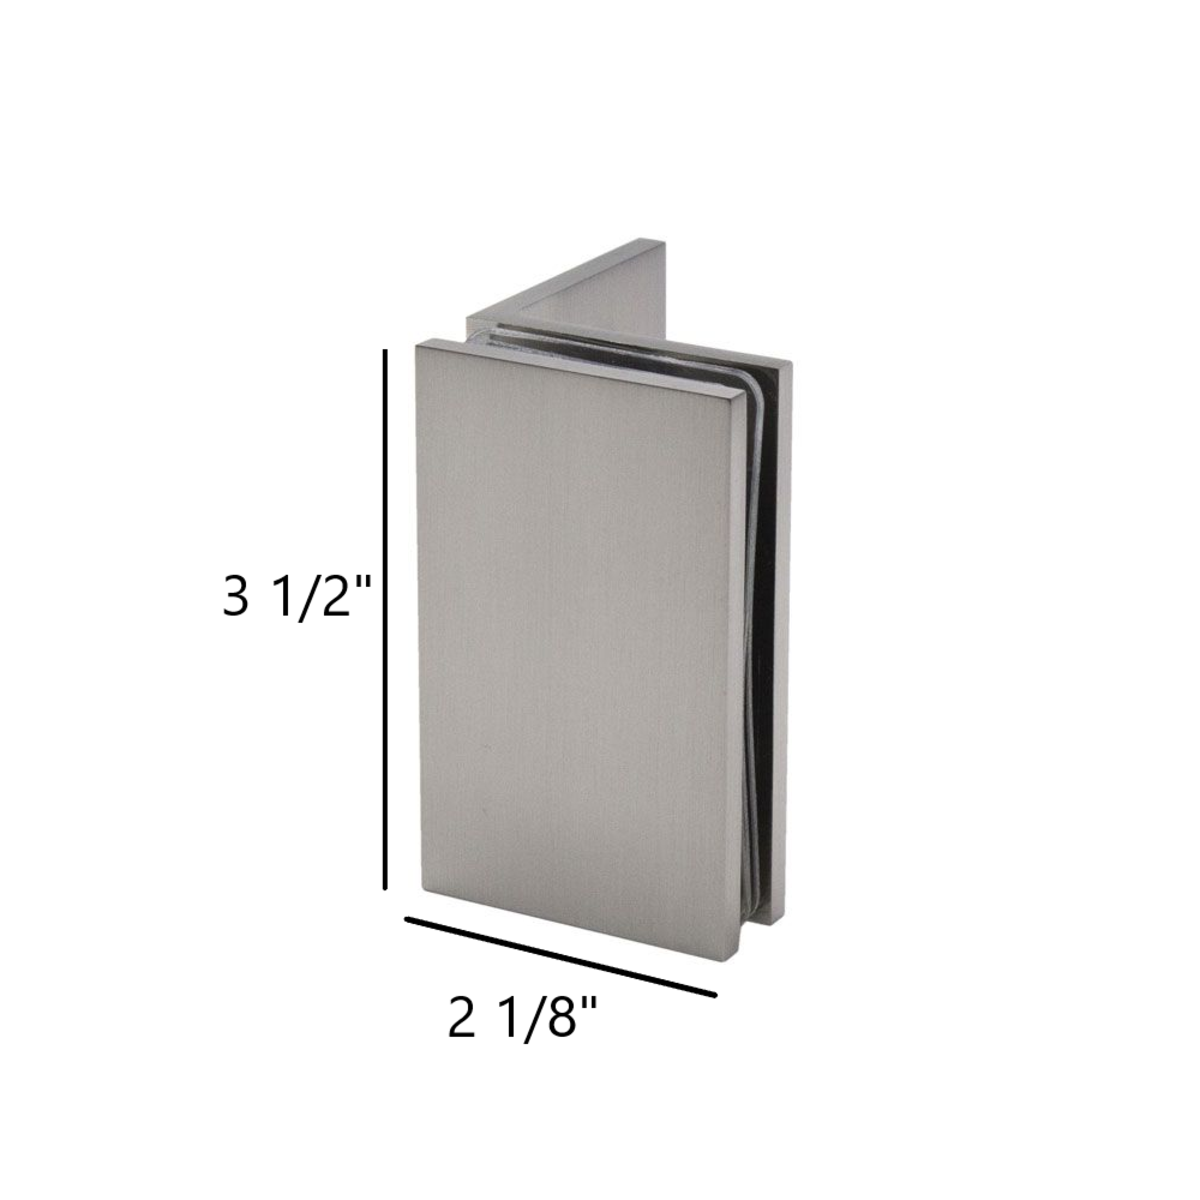 Heavy Duty 3 1/2" x 2 1/8" Square Edges Glass Clamp